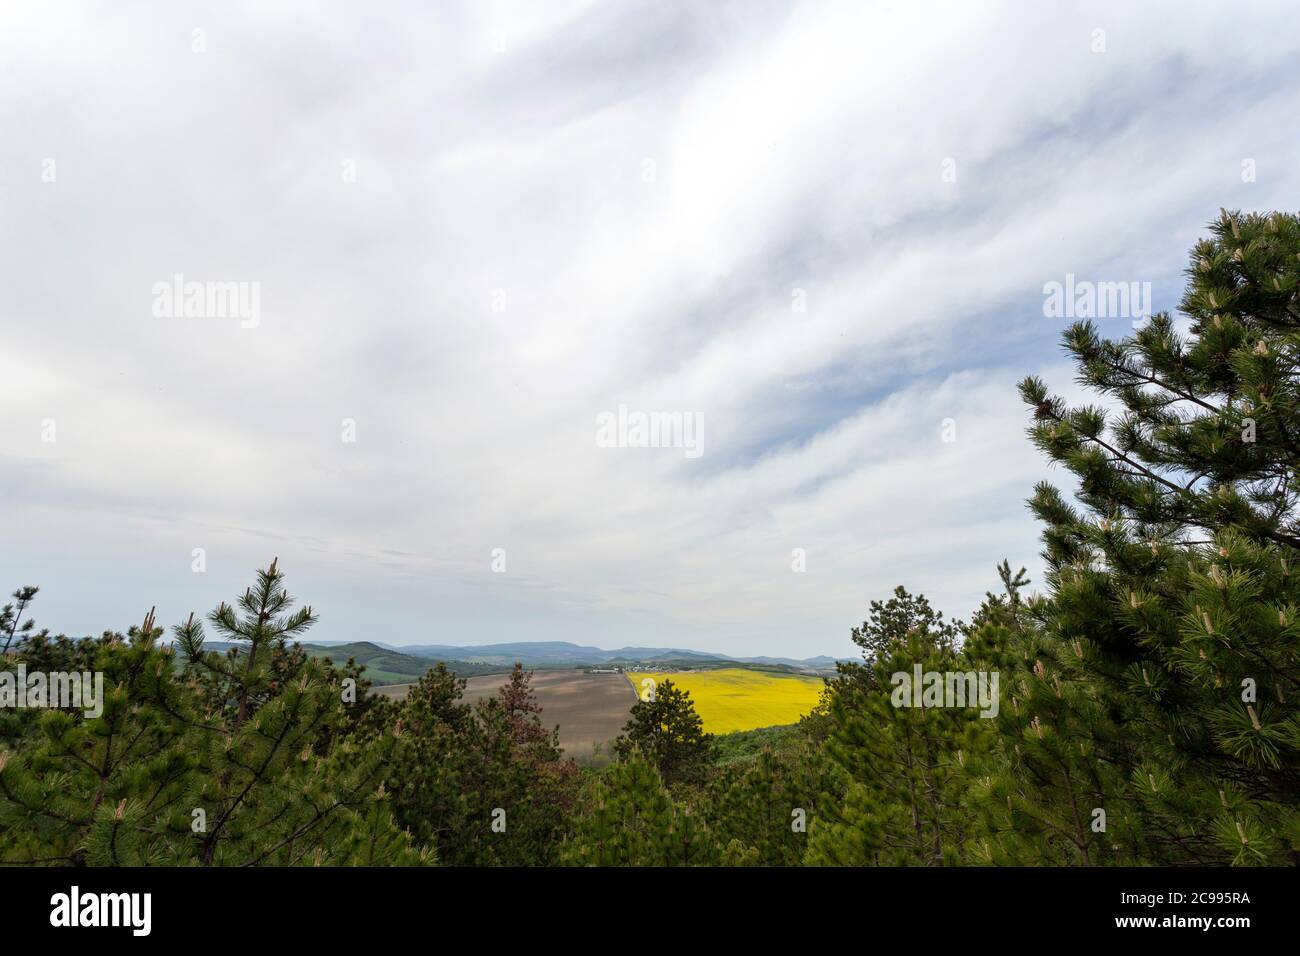 Hiking path in the woods near the village of Zsambek, Hungary on a cloudy spring day. Stock Photo